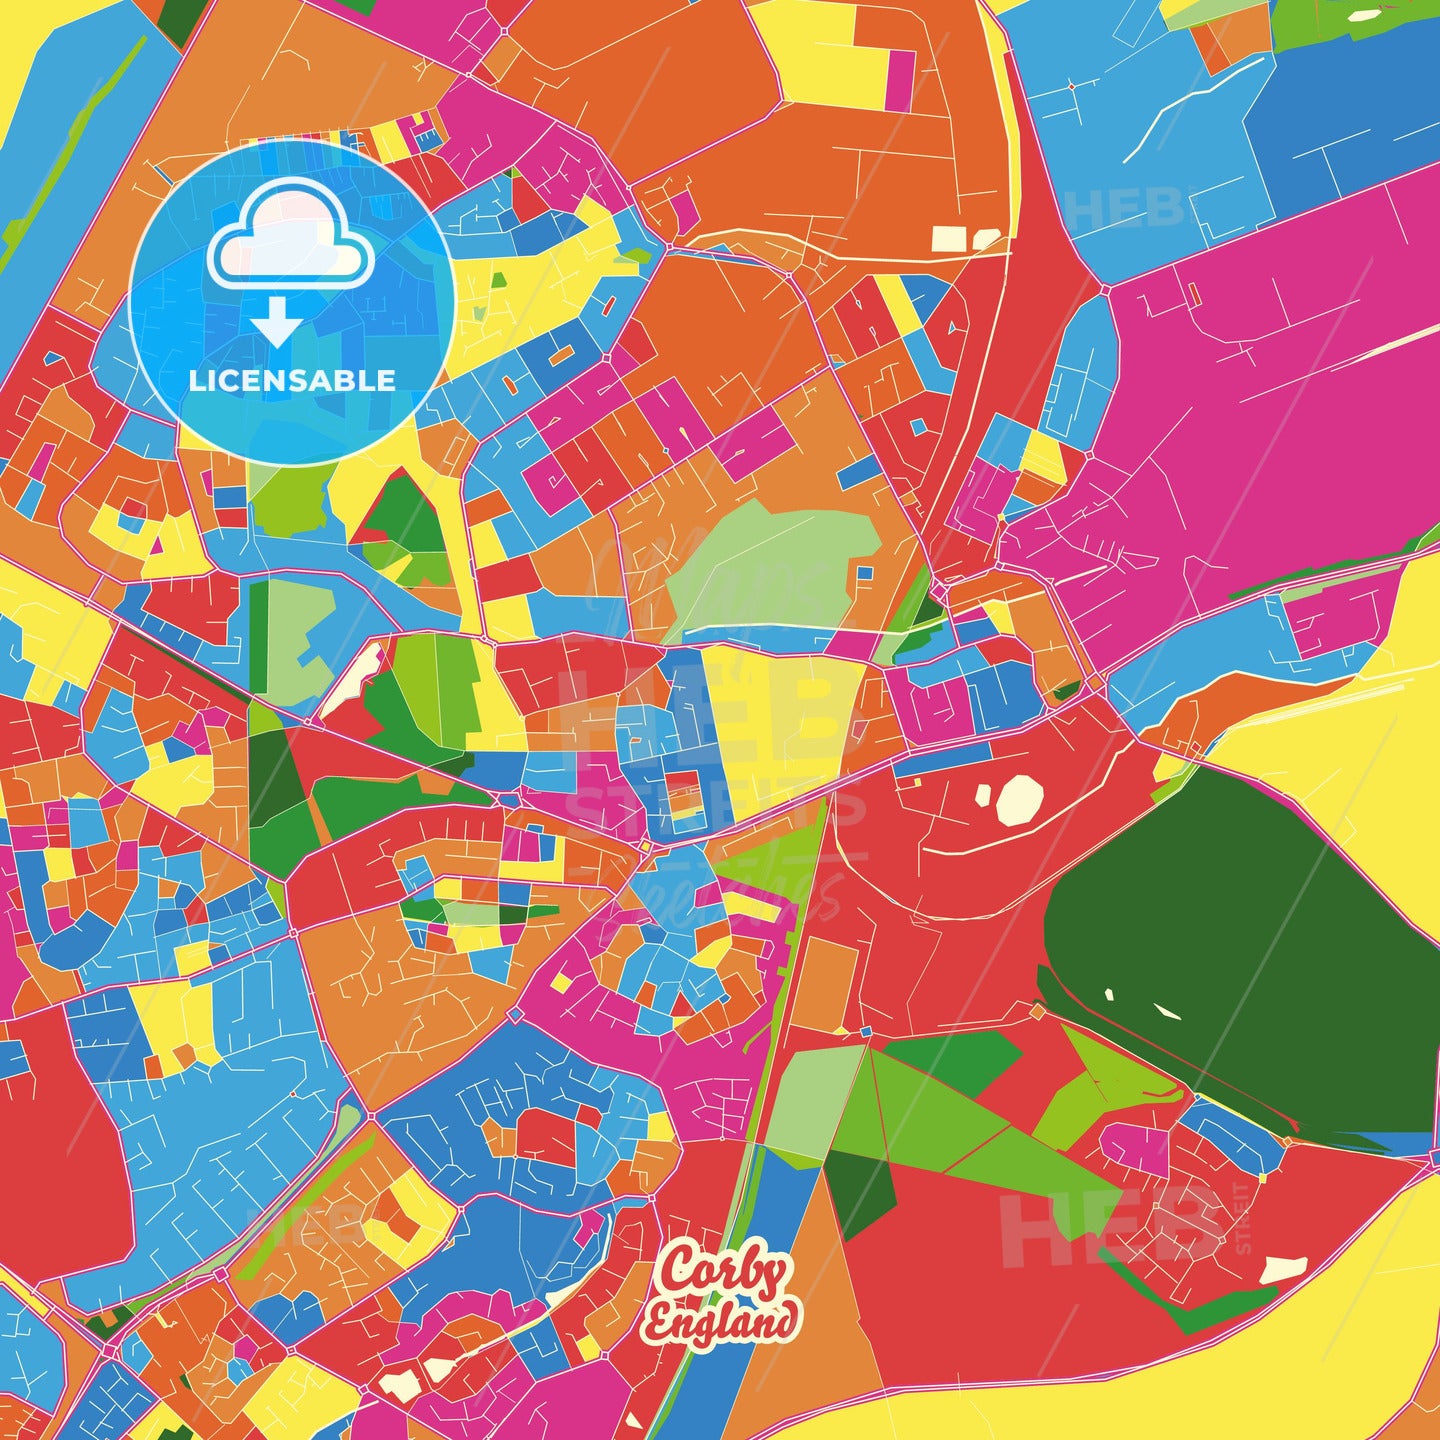 Corby, England Crazy Colorful Street Map Poster Template - HEBSTREITS Sketches